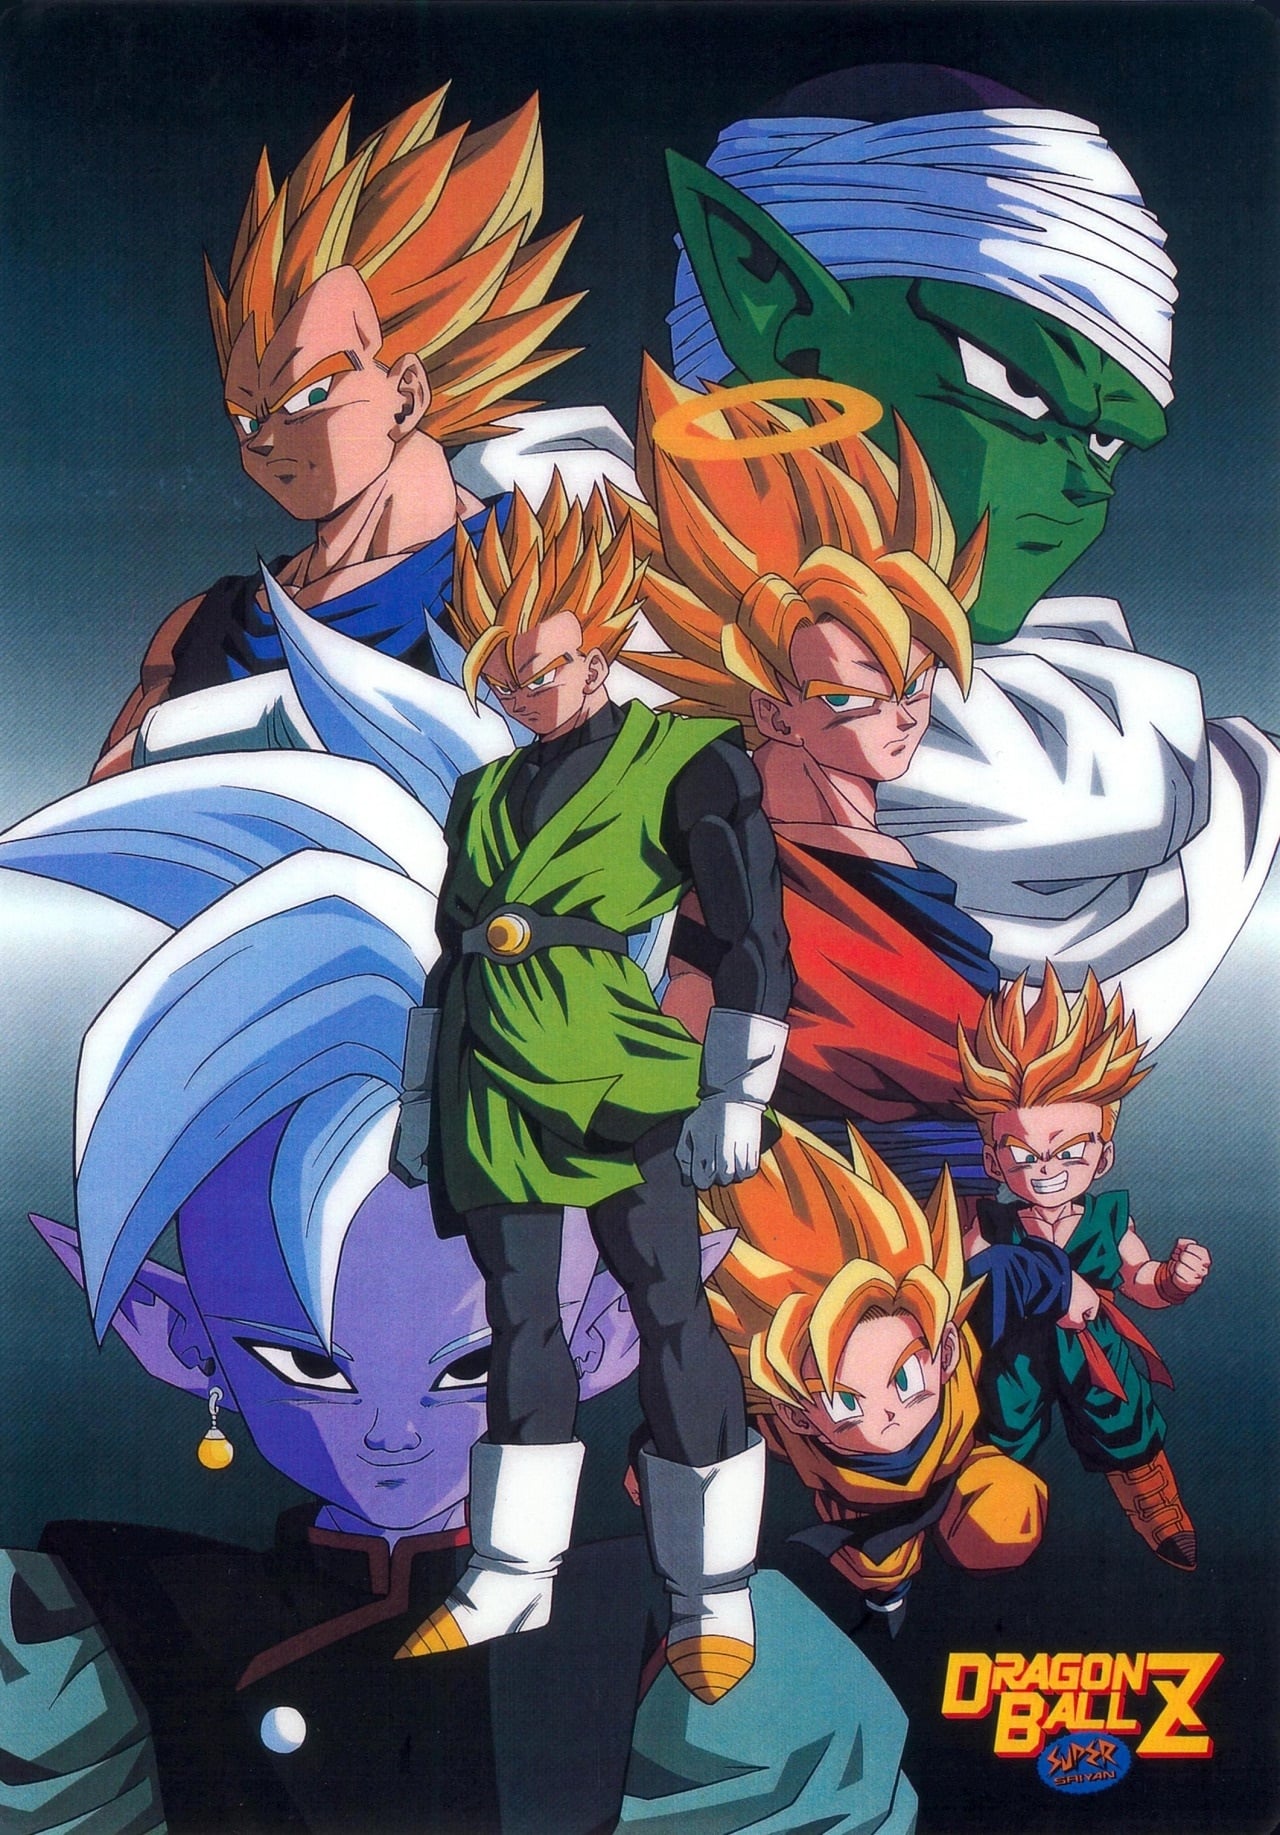 Dragon Ball Z (TV Series 1989-1996) - Posters — The Movie Database